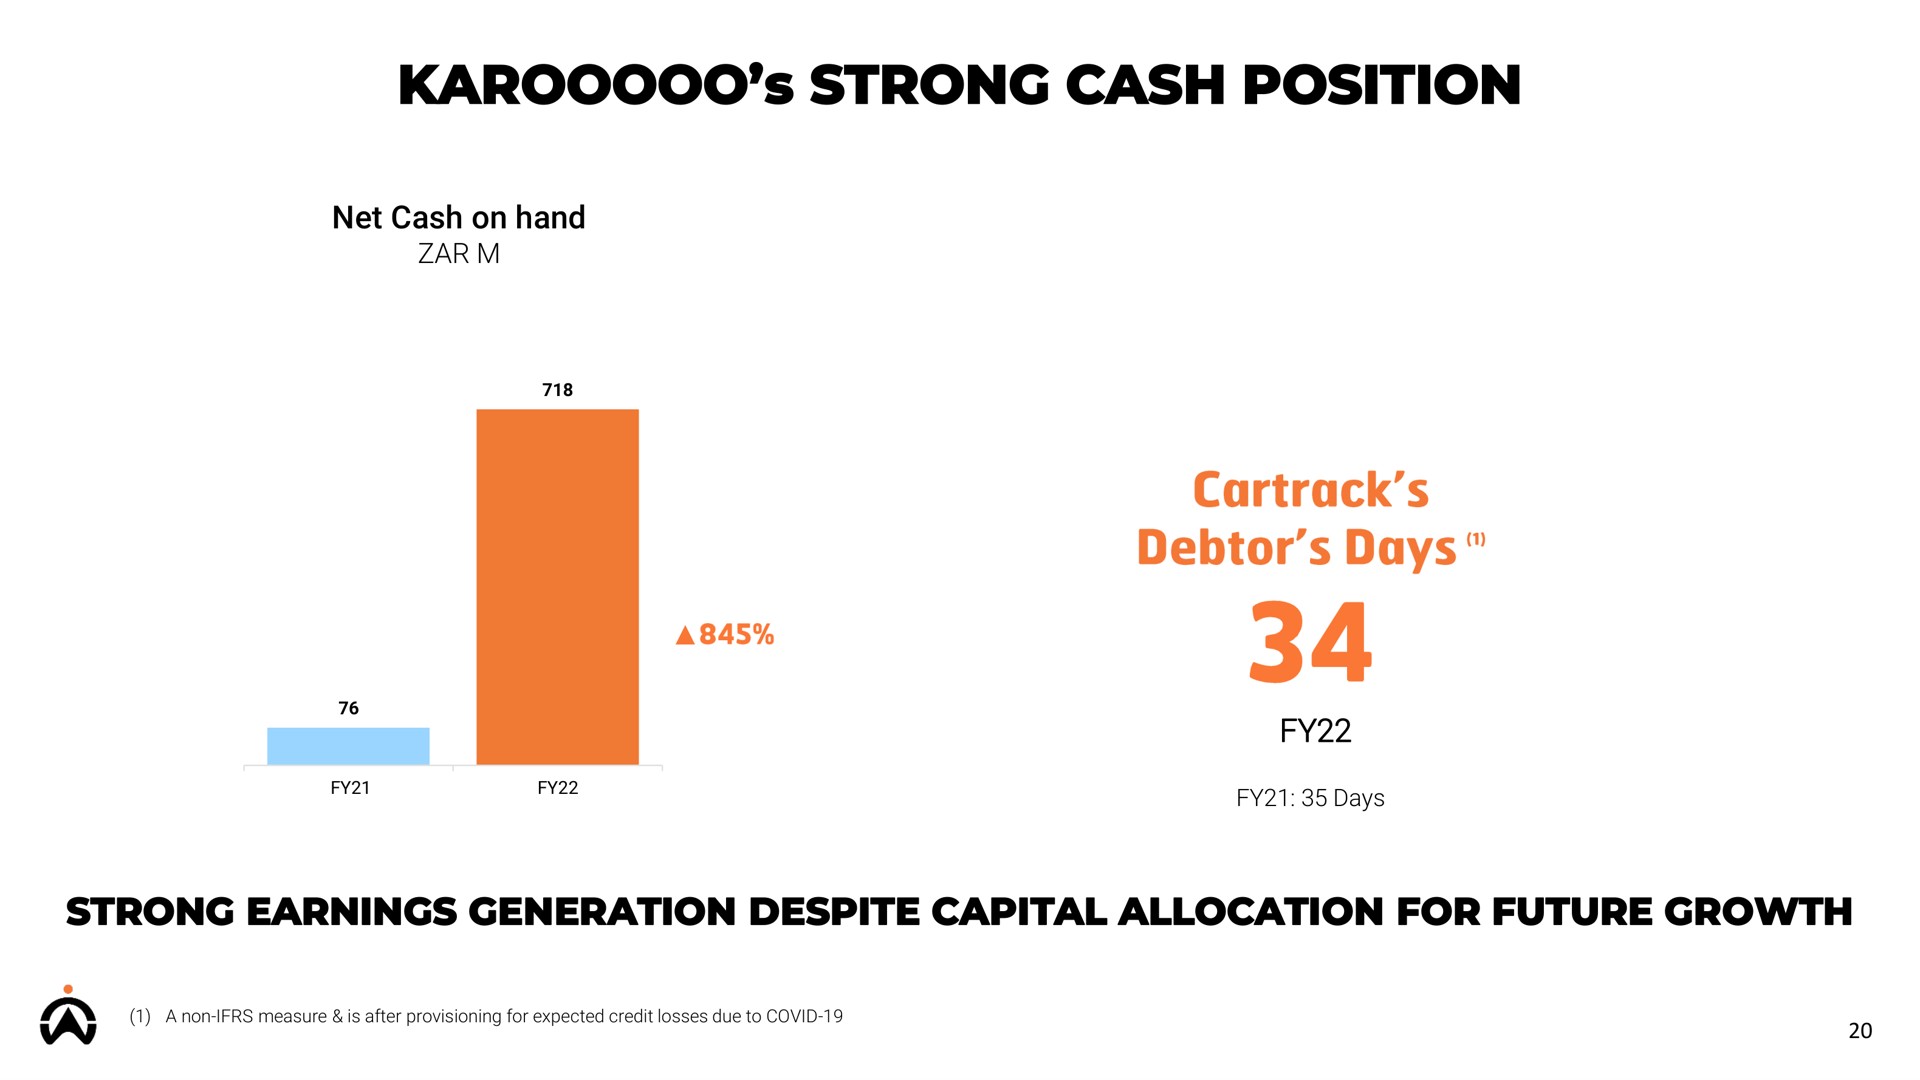 strong cash position strong earnings generation despite capital allocation for future growth debtor days | Karooooo